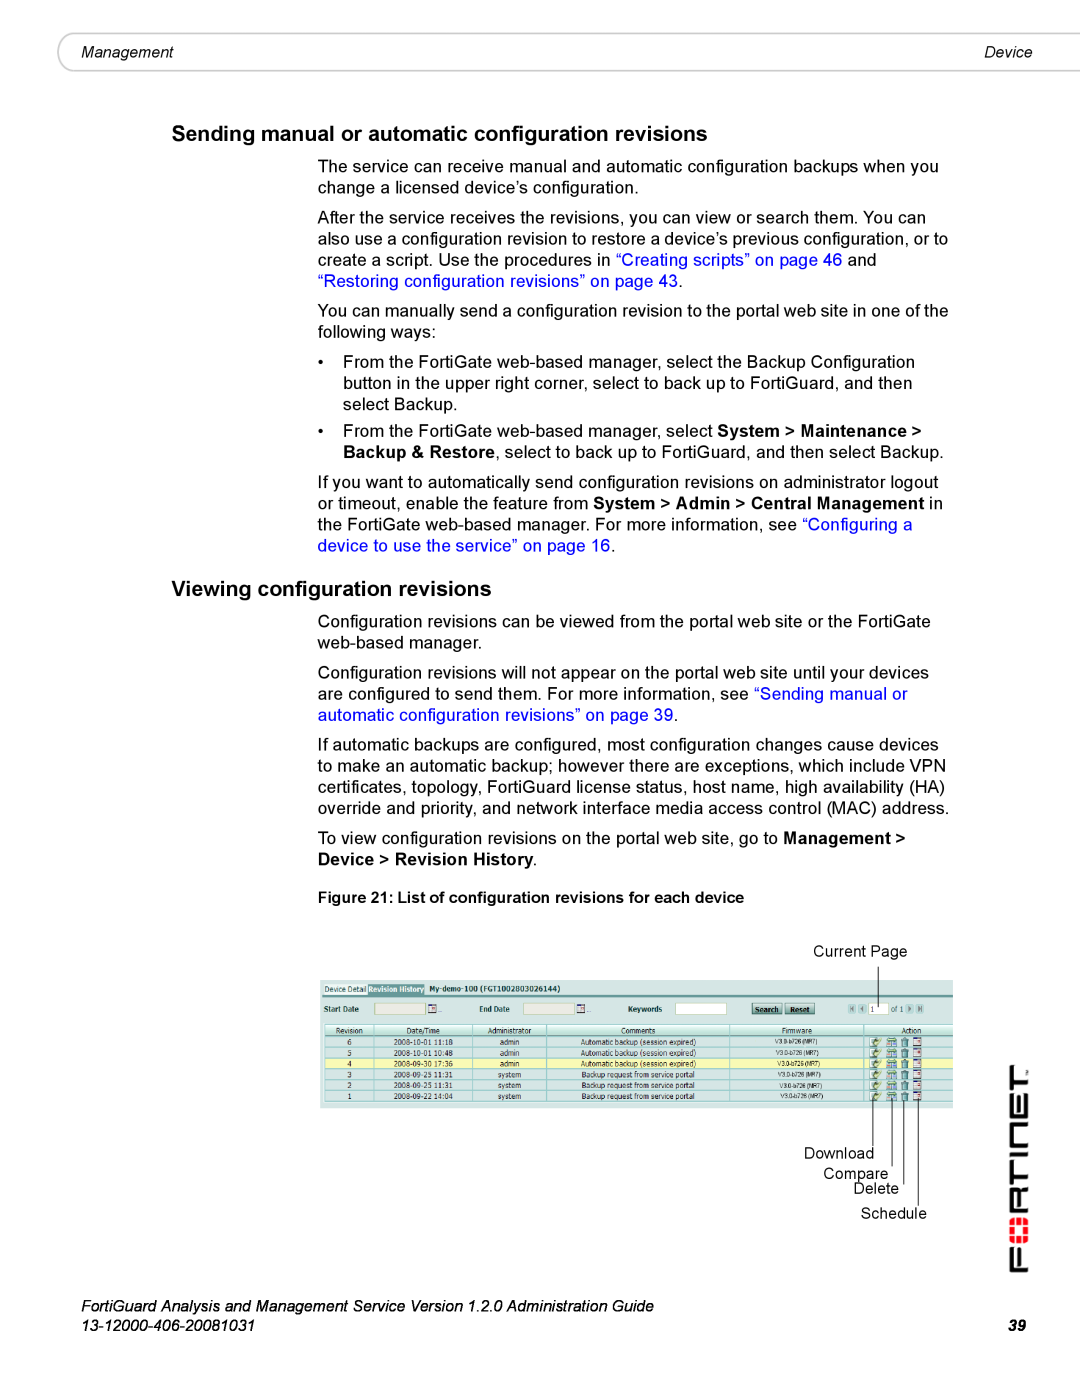 Fortinet 1.2.0 Sending manual or automatic configuration revisions, Viewing configuration revisions 